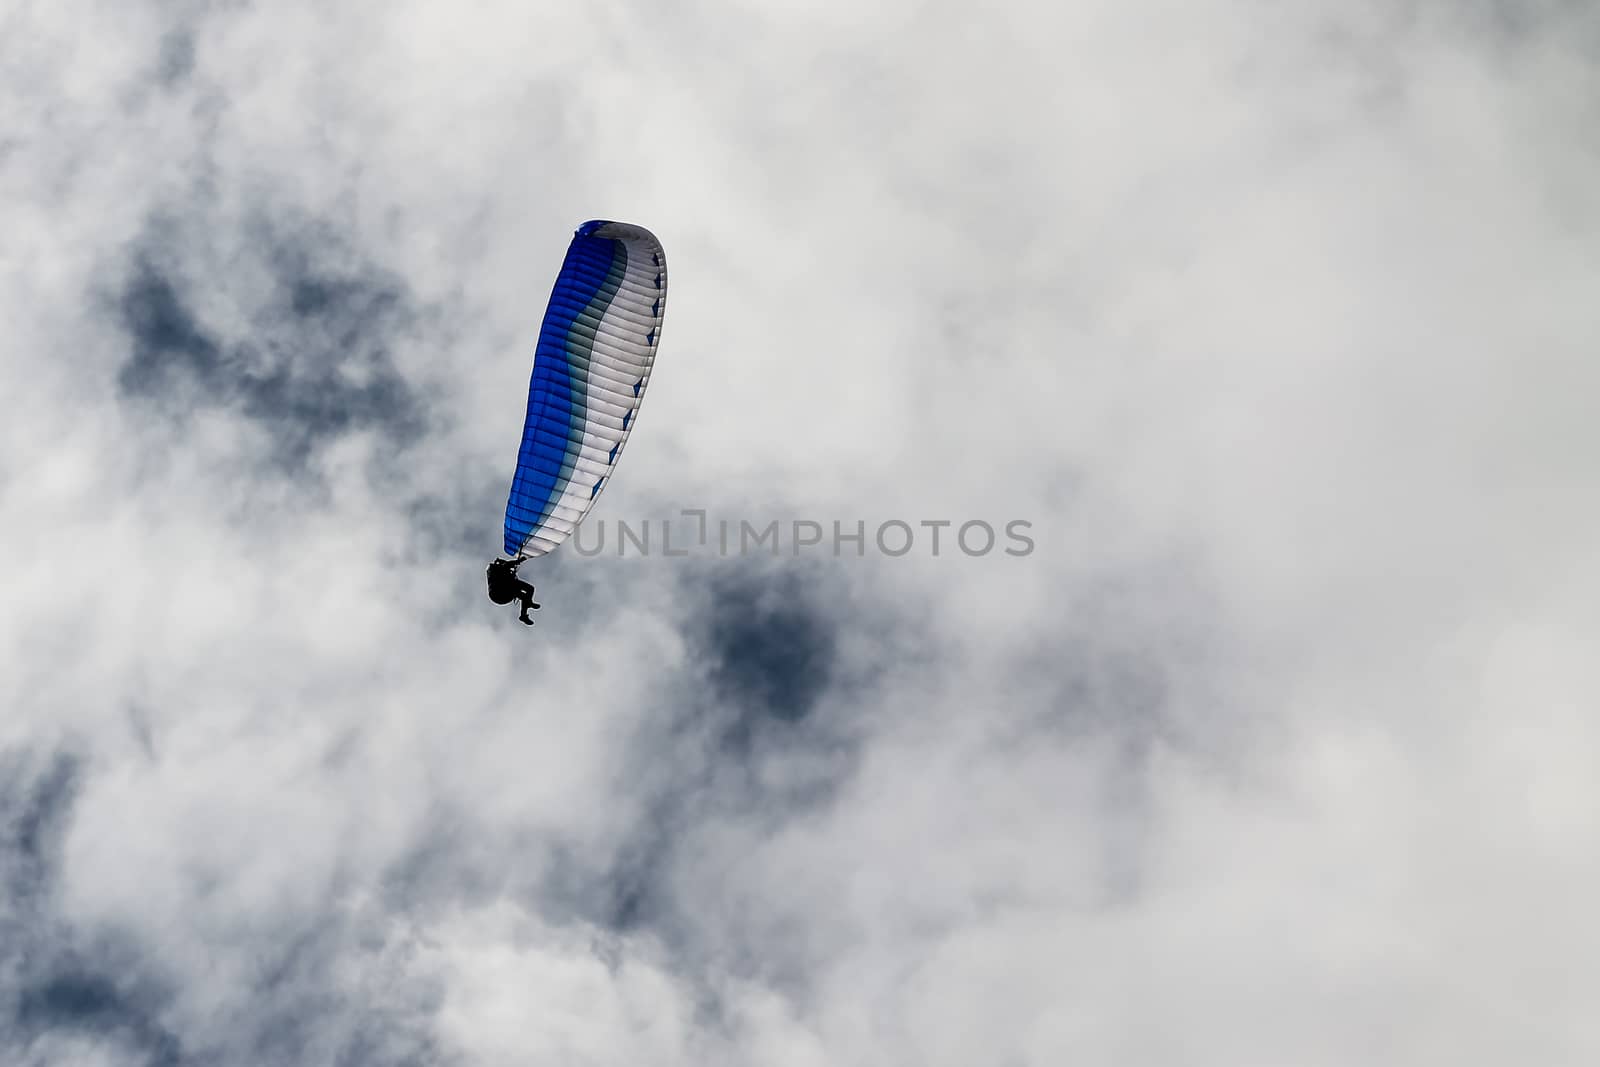 Paragliding against the white clouds by Alexanderphoto